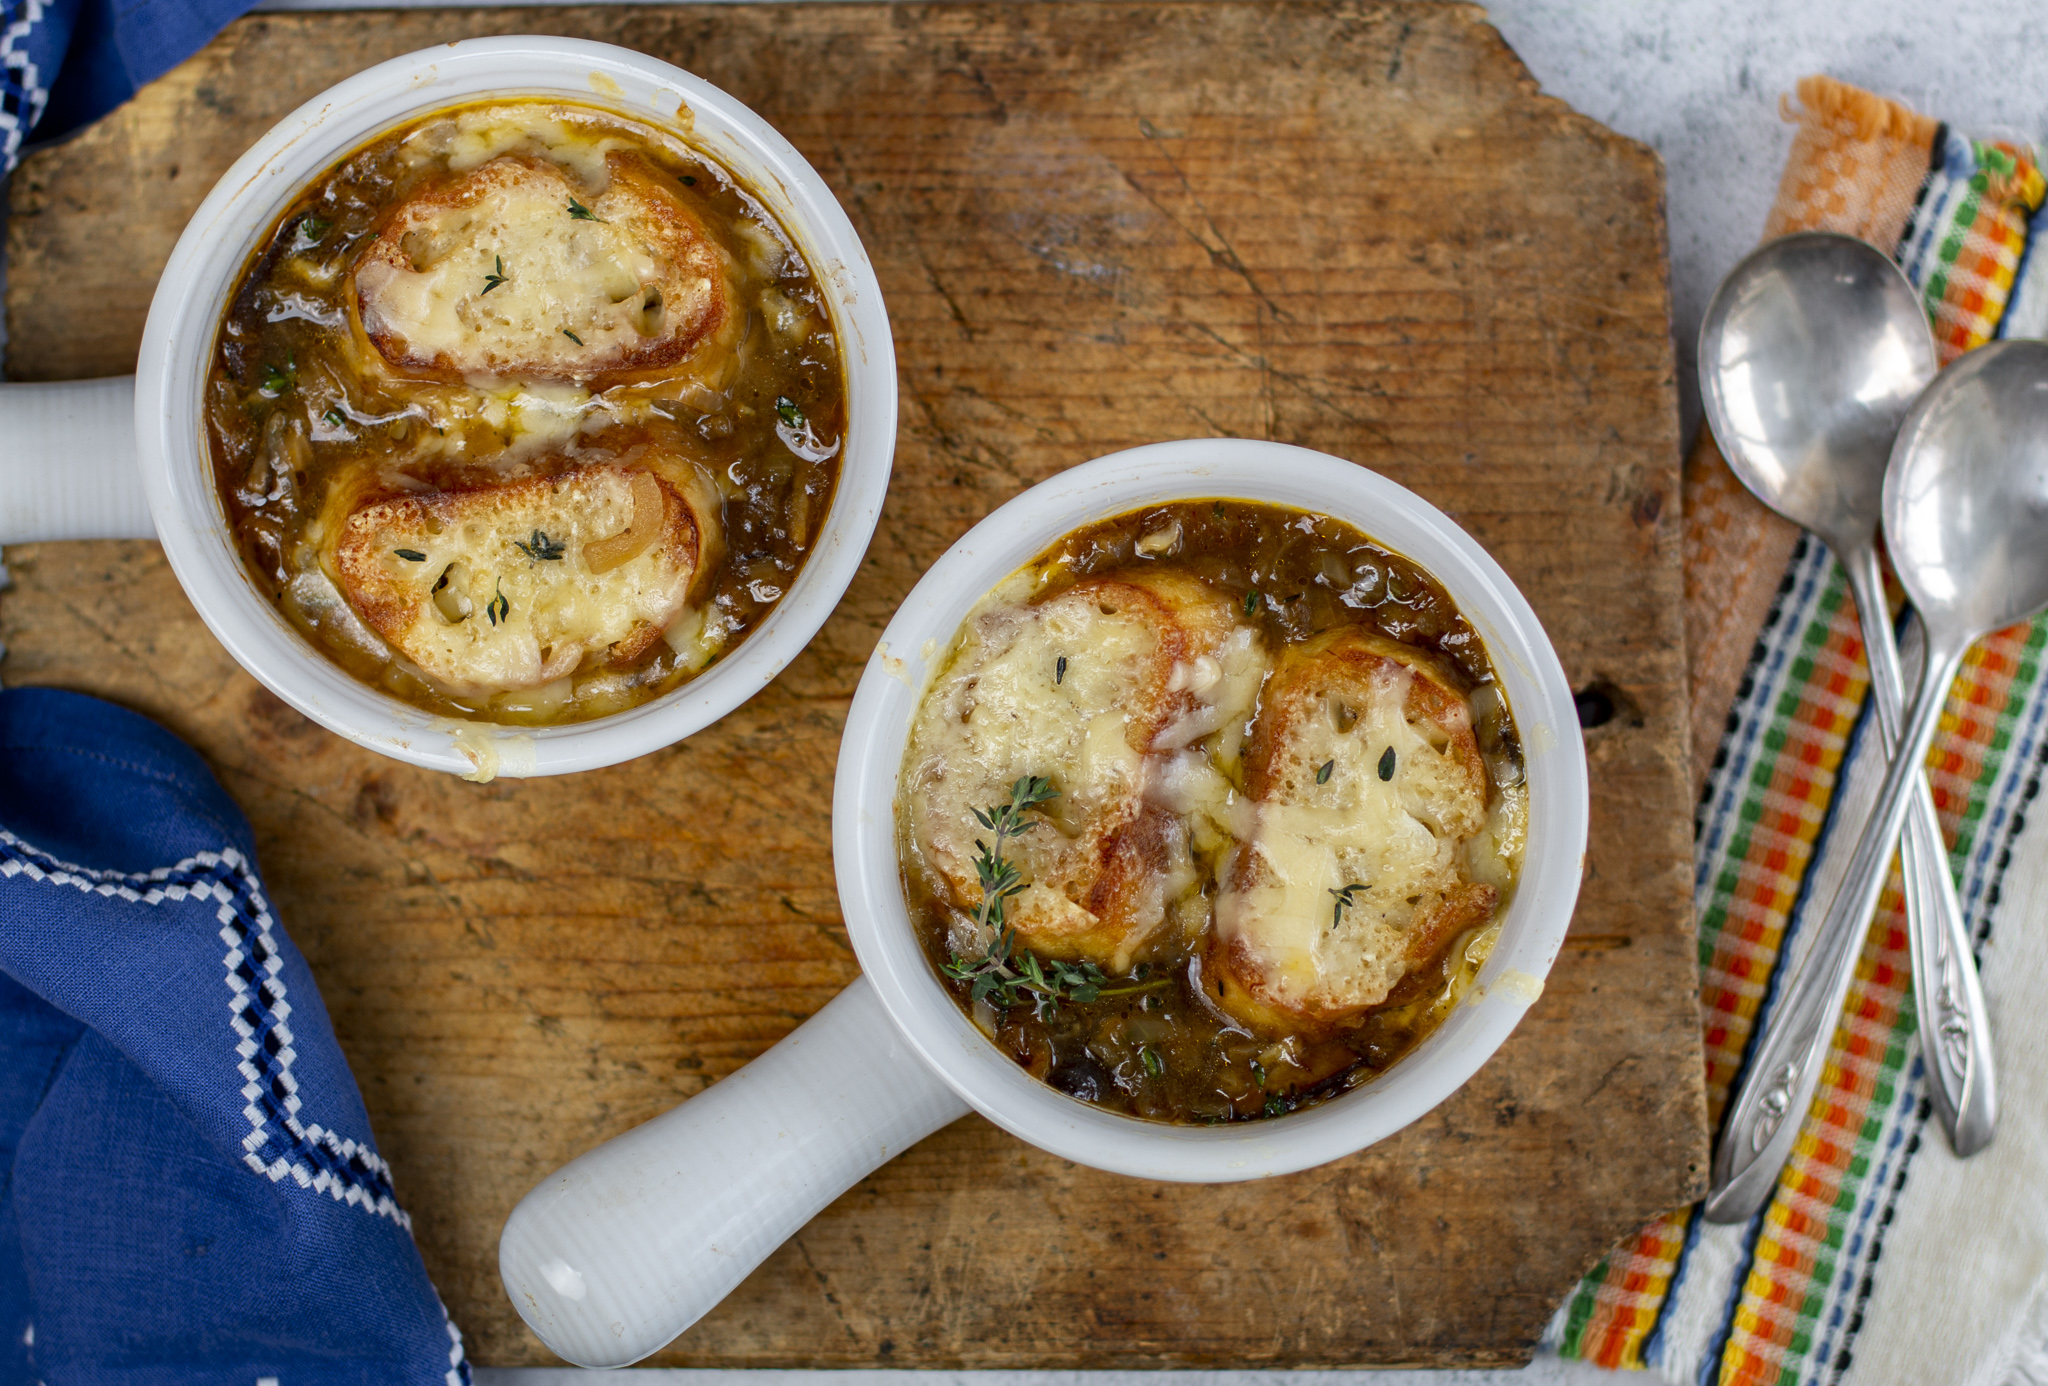 Classic french Onion Soup in white modern crocks on a wooden board with vintage linens